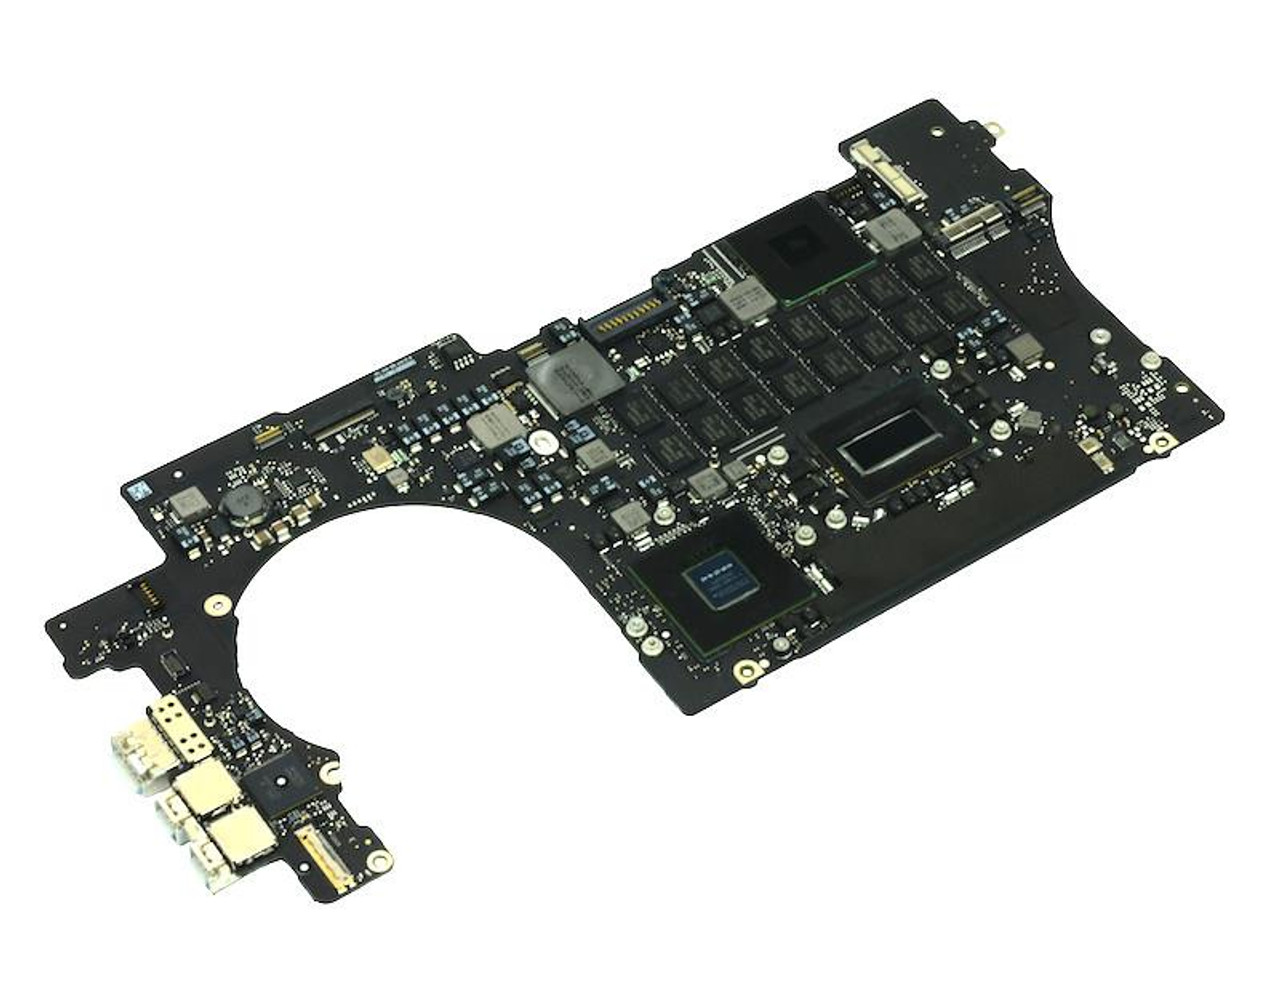 661-6485 Apple System Board (Motherboard) for MacBook Pro 15-Inch Mid 2012 (Refurbished)